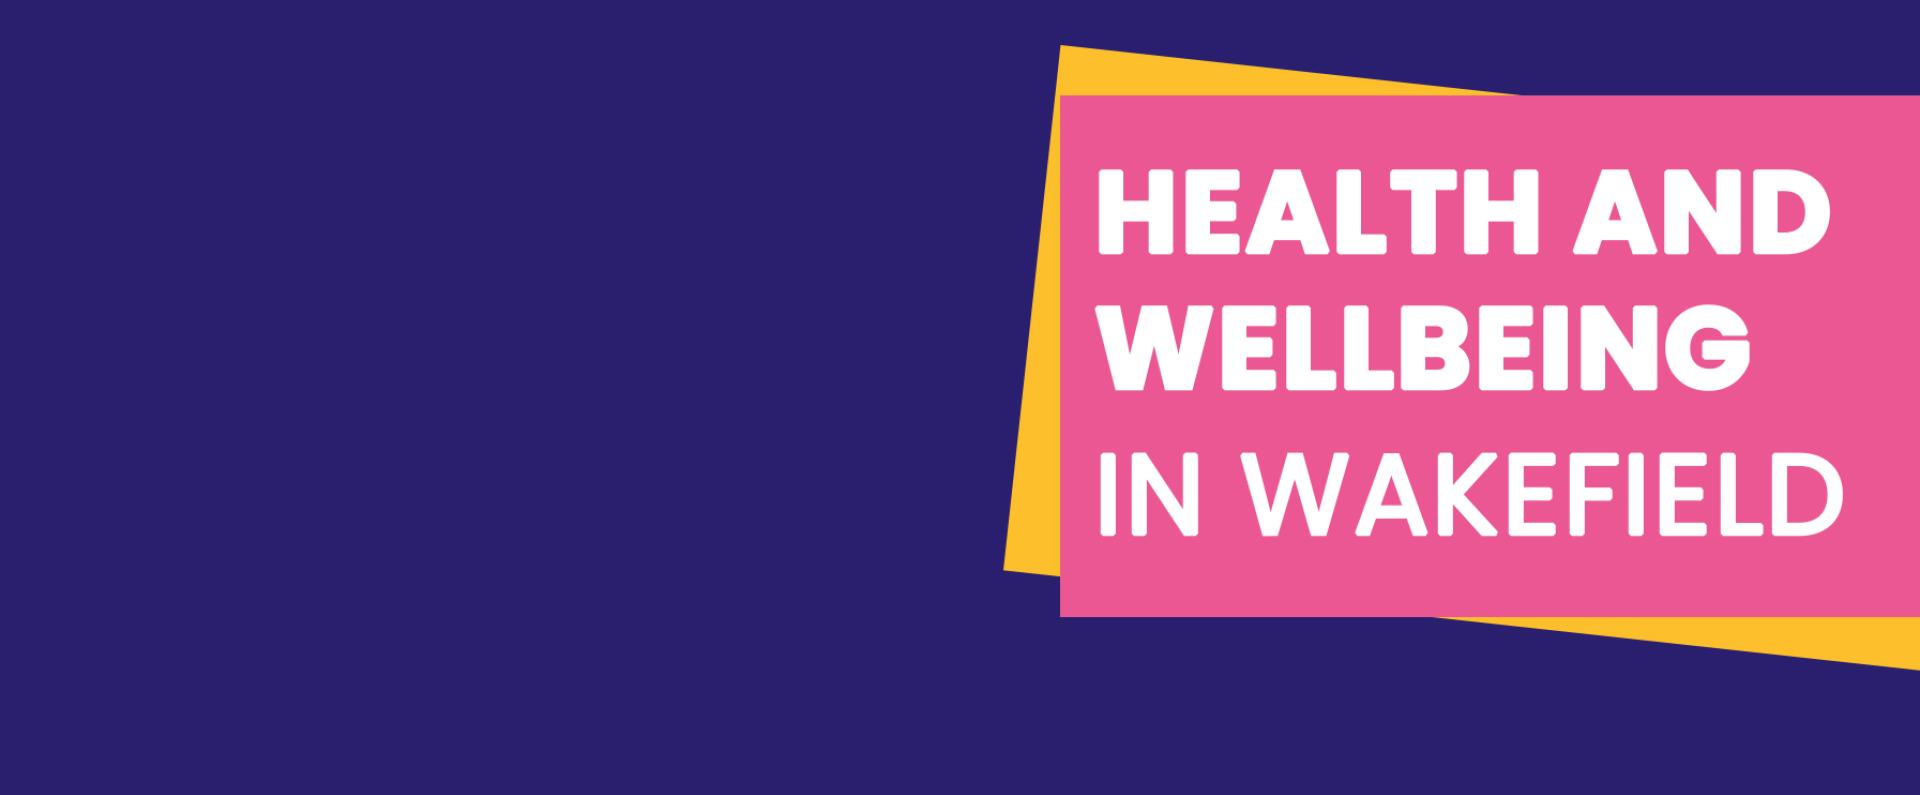 Health and wellbeing in Wakefield banner